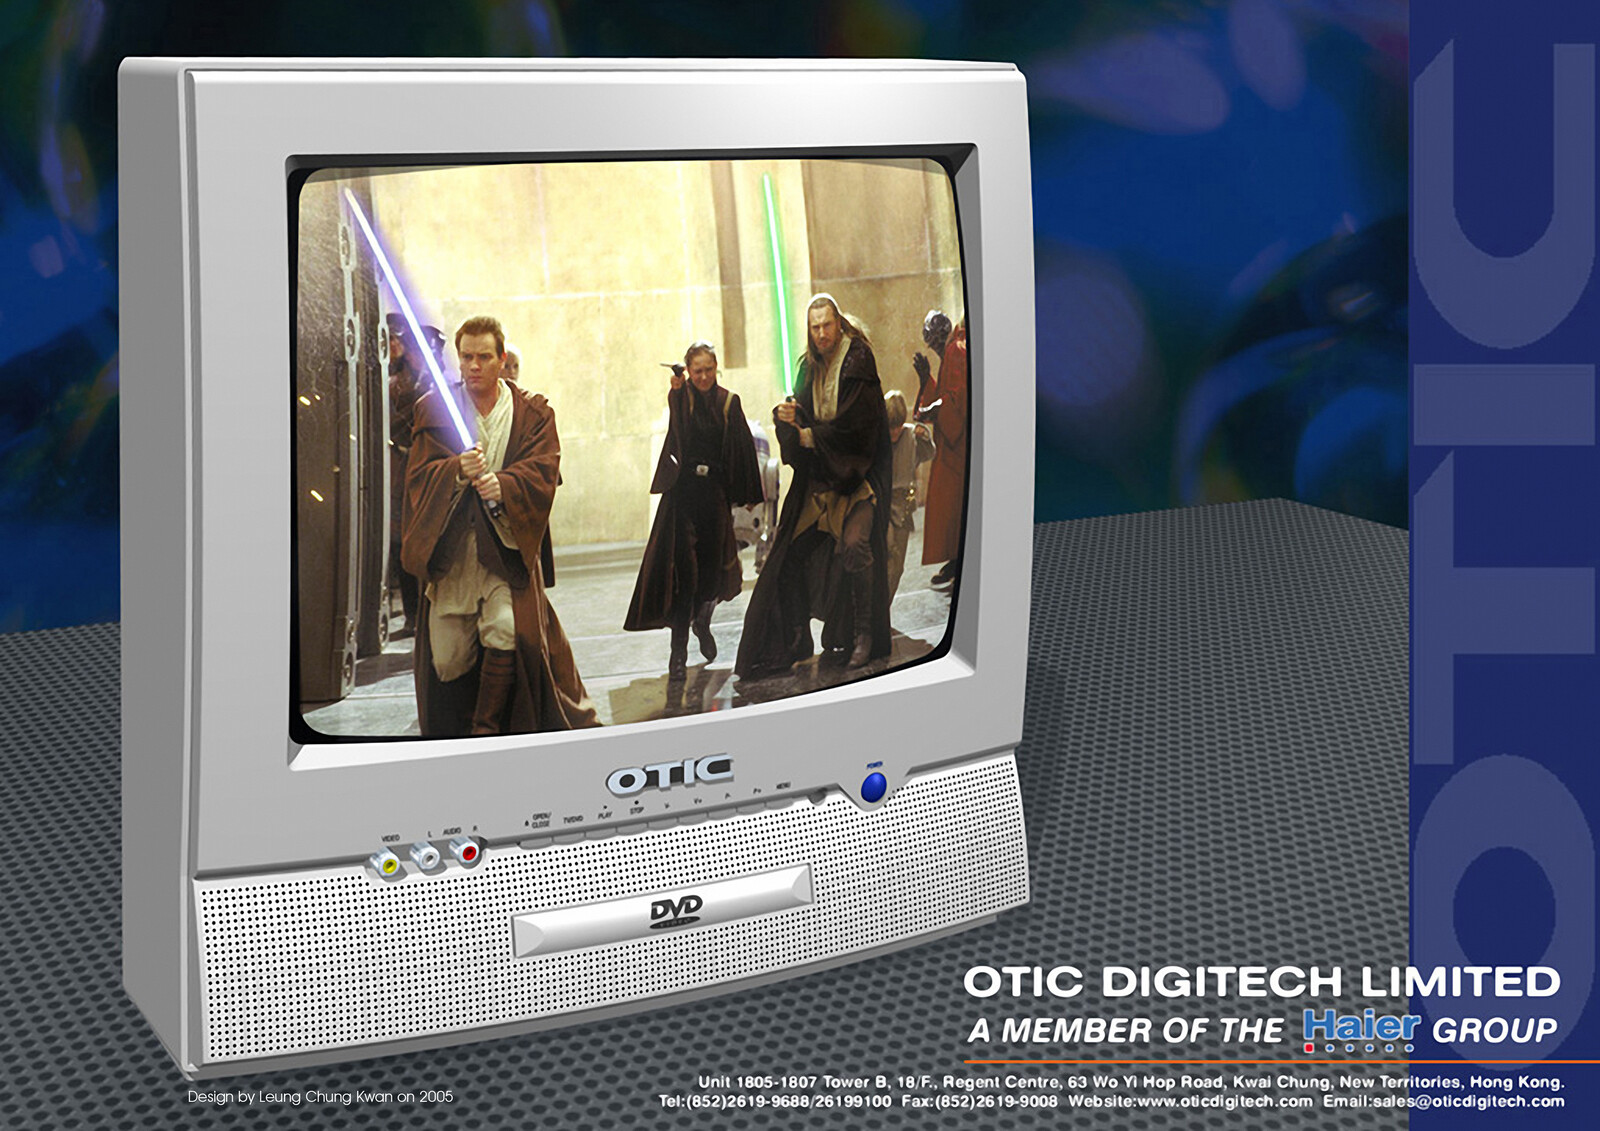 💎 CRT Color TV with DVD Player Combo | Design by Leung Chung Kwan on 2005 💎
Brand Name︰OTIC | Client︰OTIC Limited